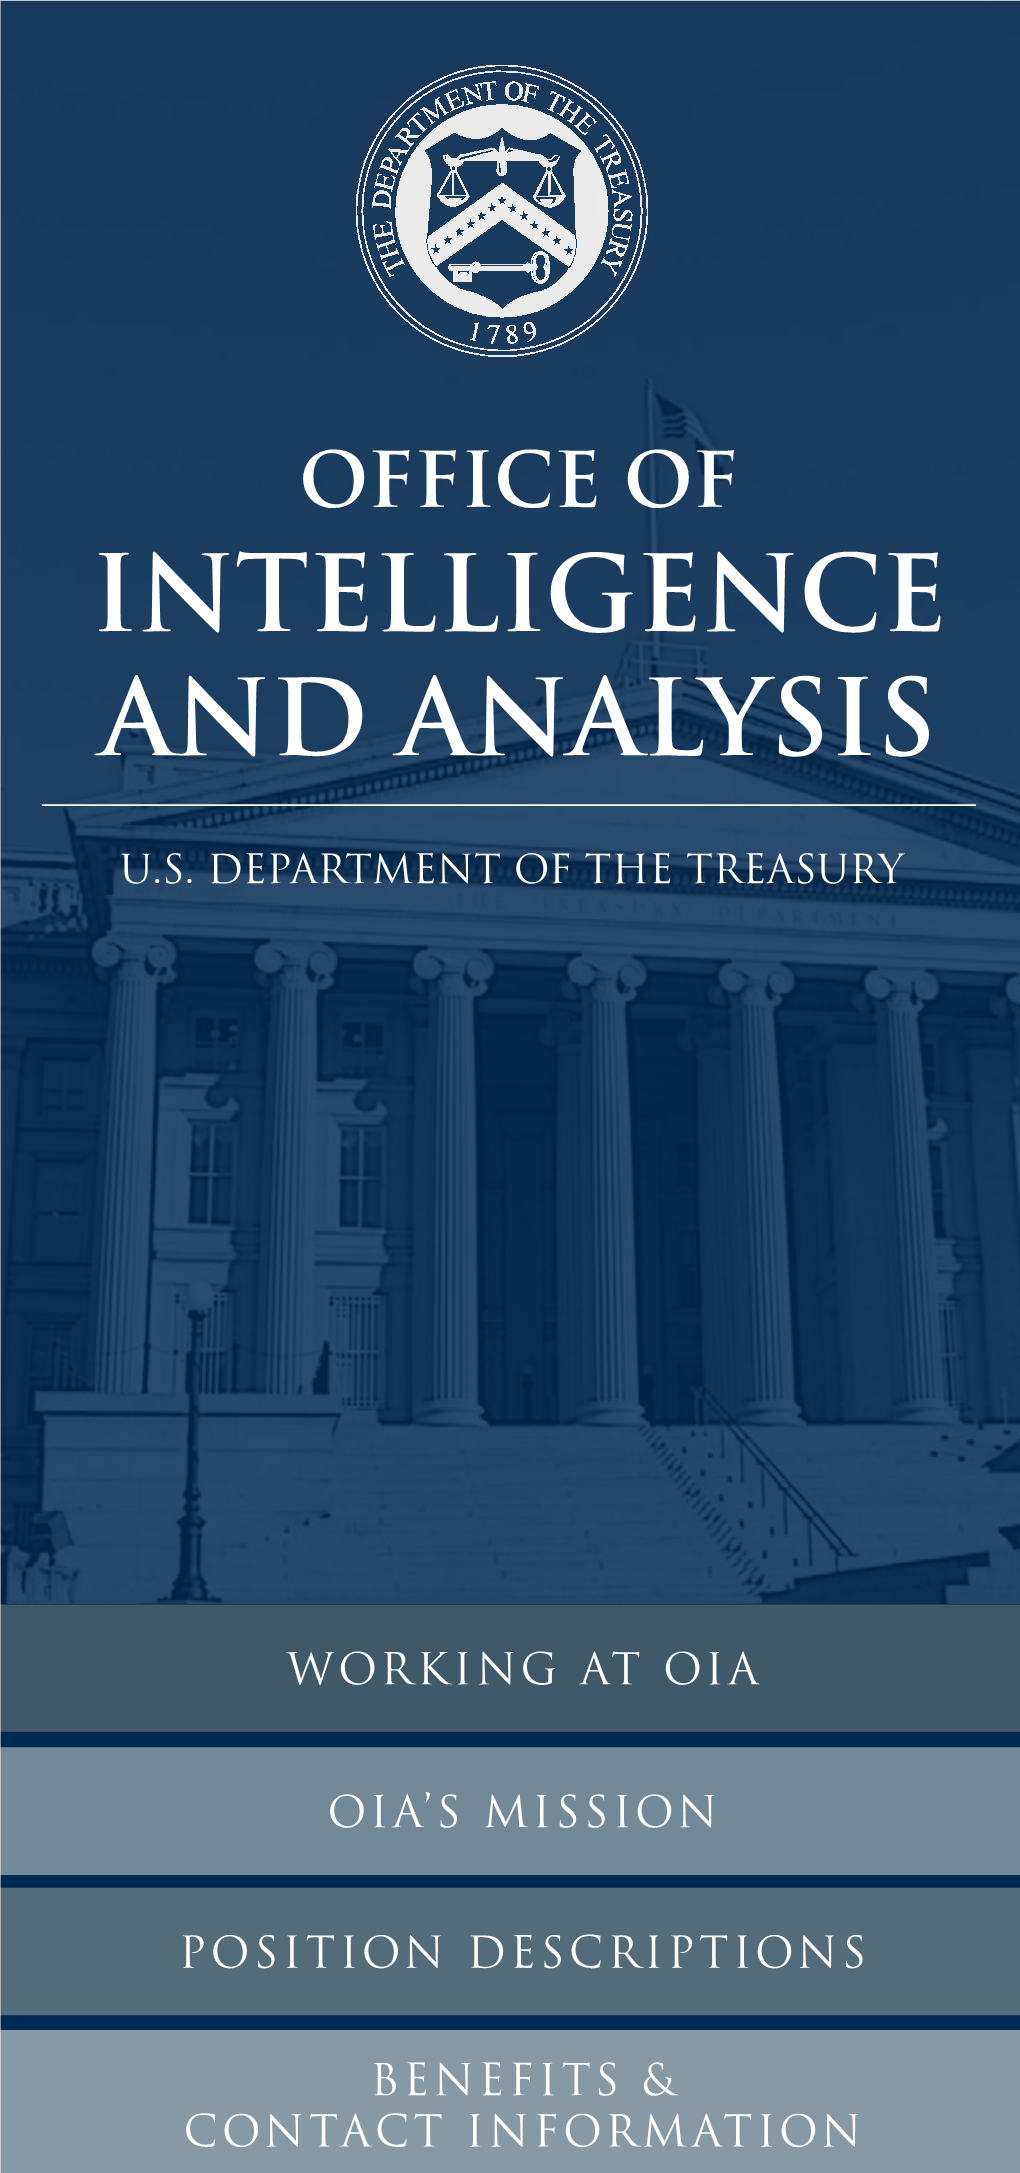 Office of Intelligence and Analysis